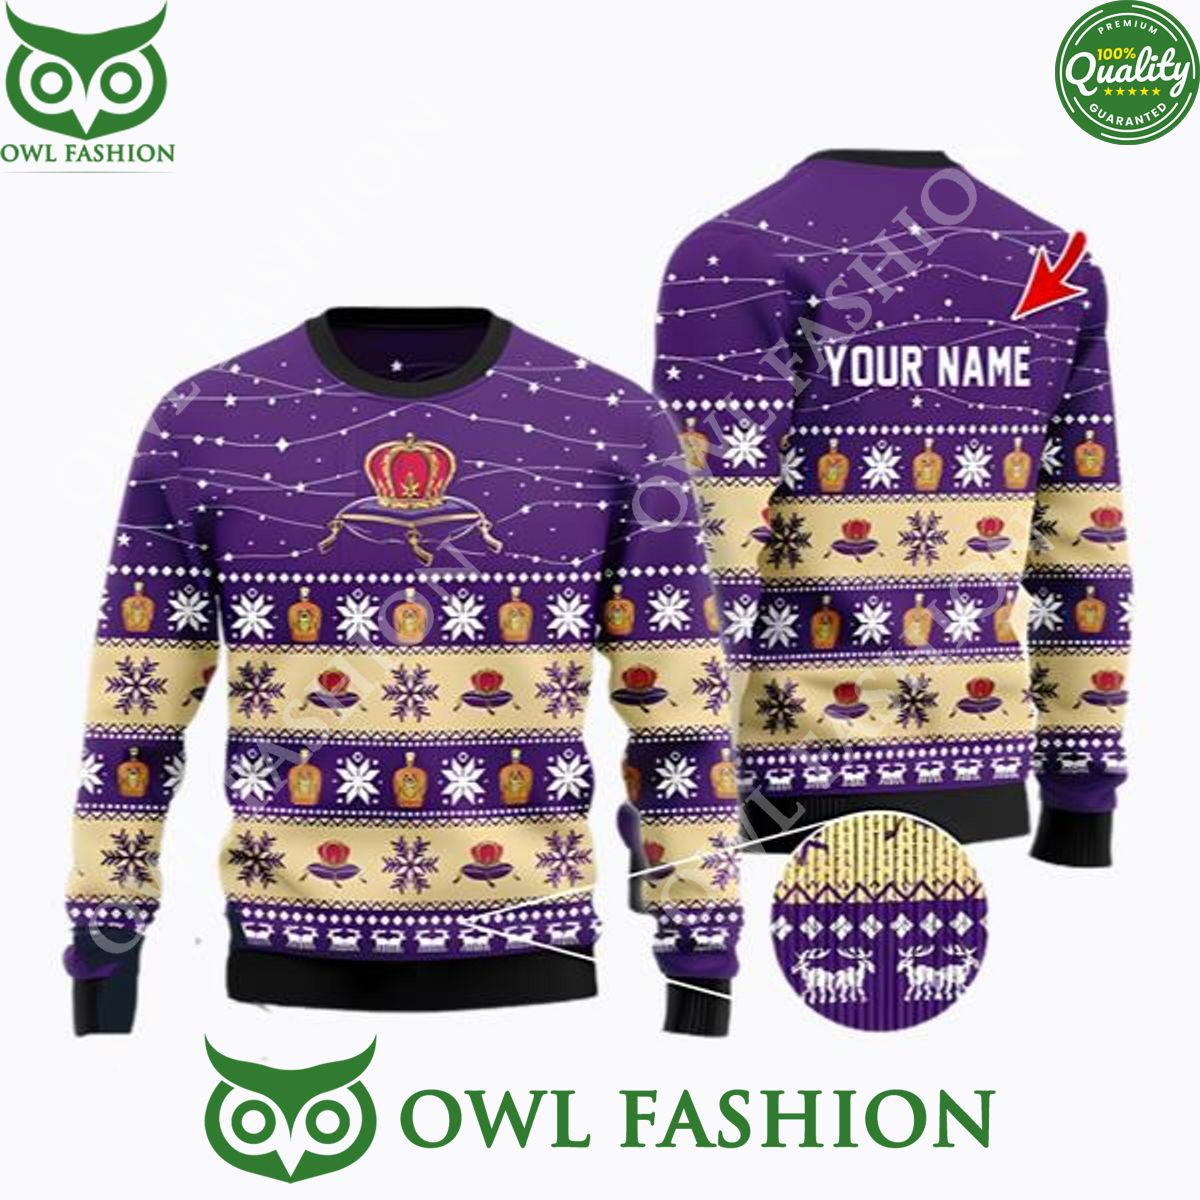 Personalized Christmas Twinkle Lights Crown Royal Christmas Beer Sweater Jumper